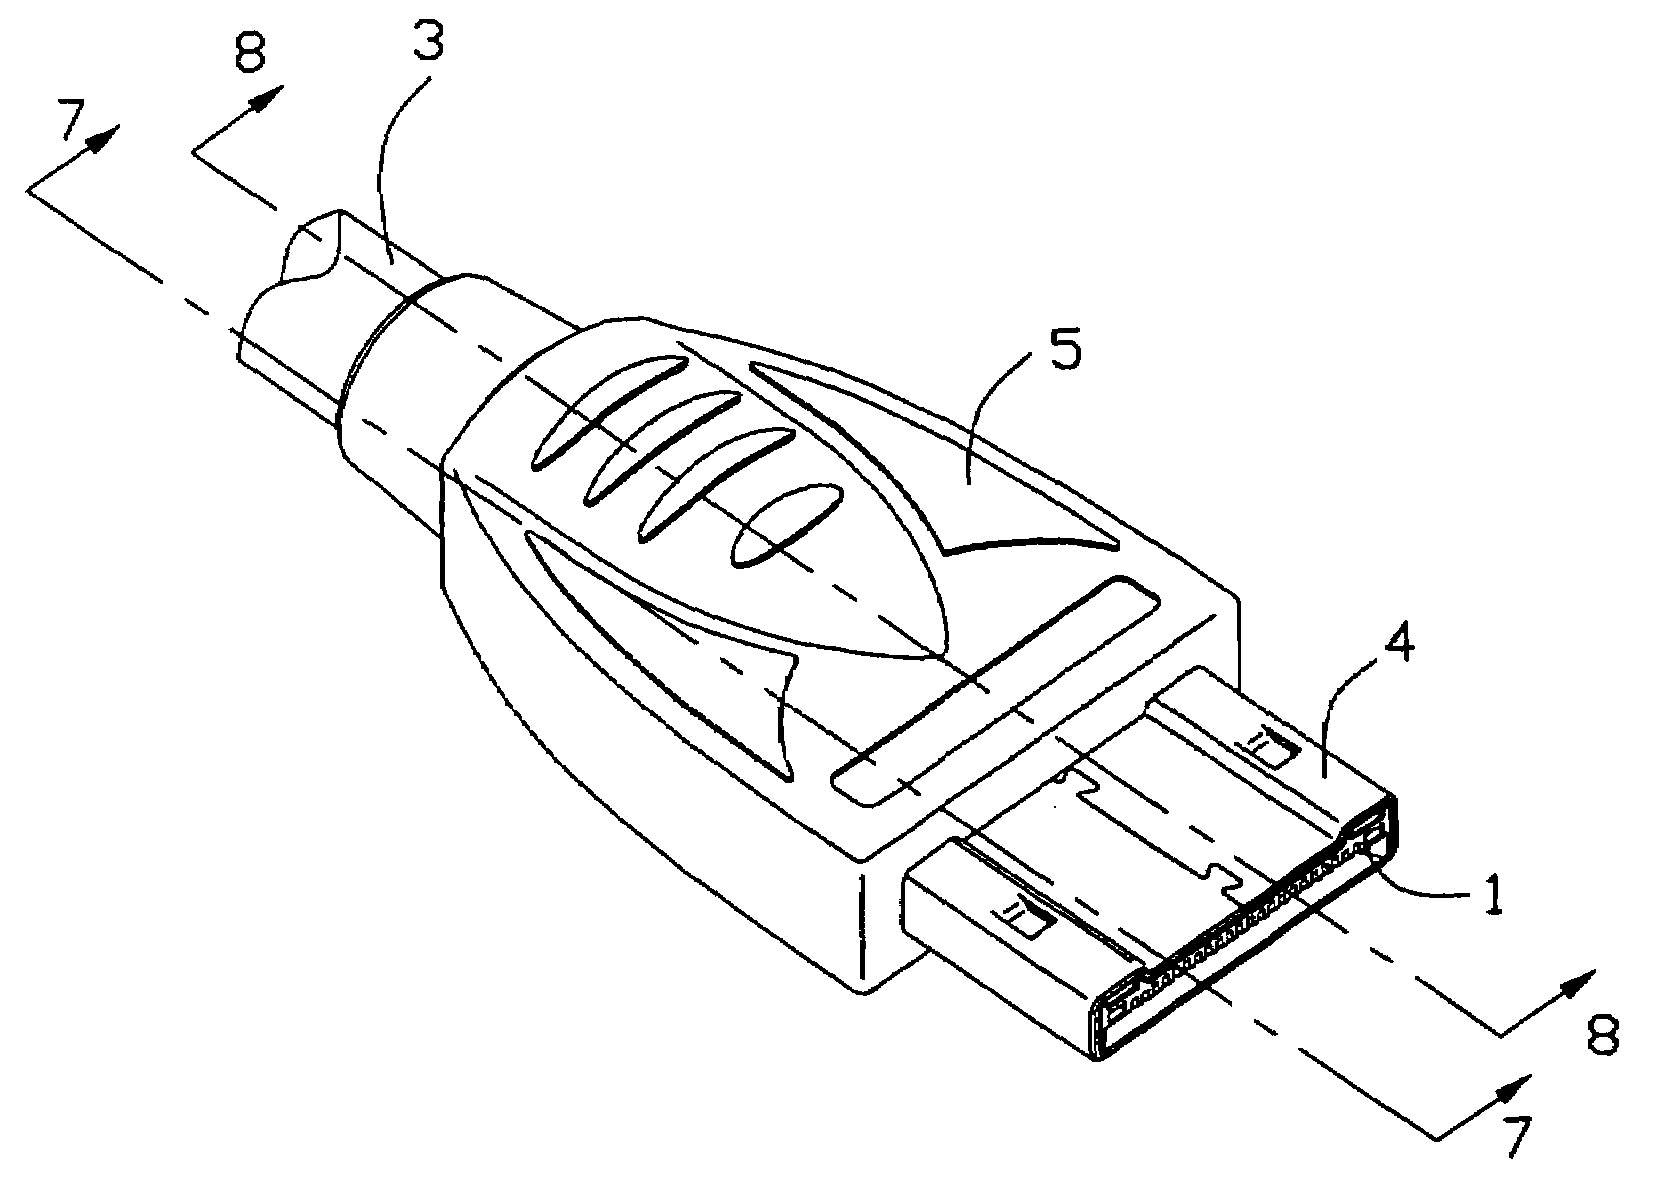 Electrical connector assembly with reduced crosstalk and electromaganetic interference